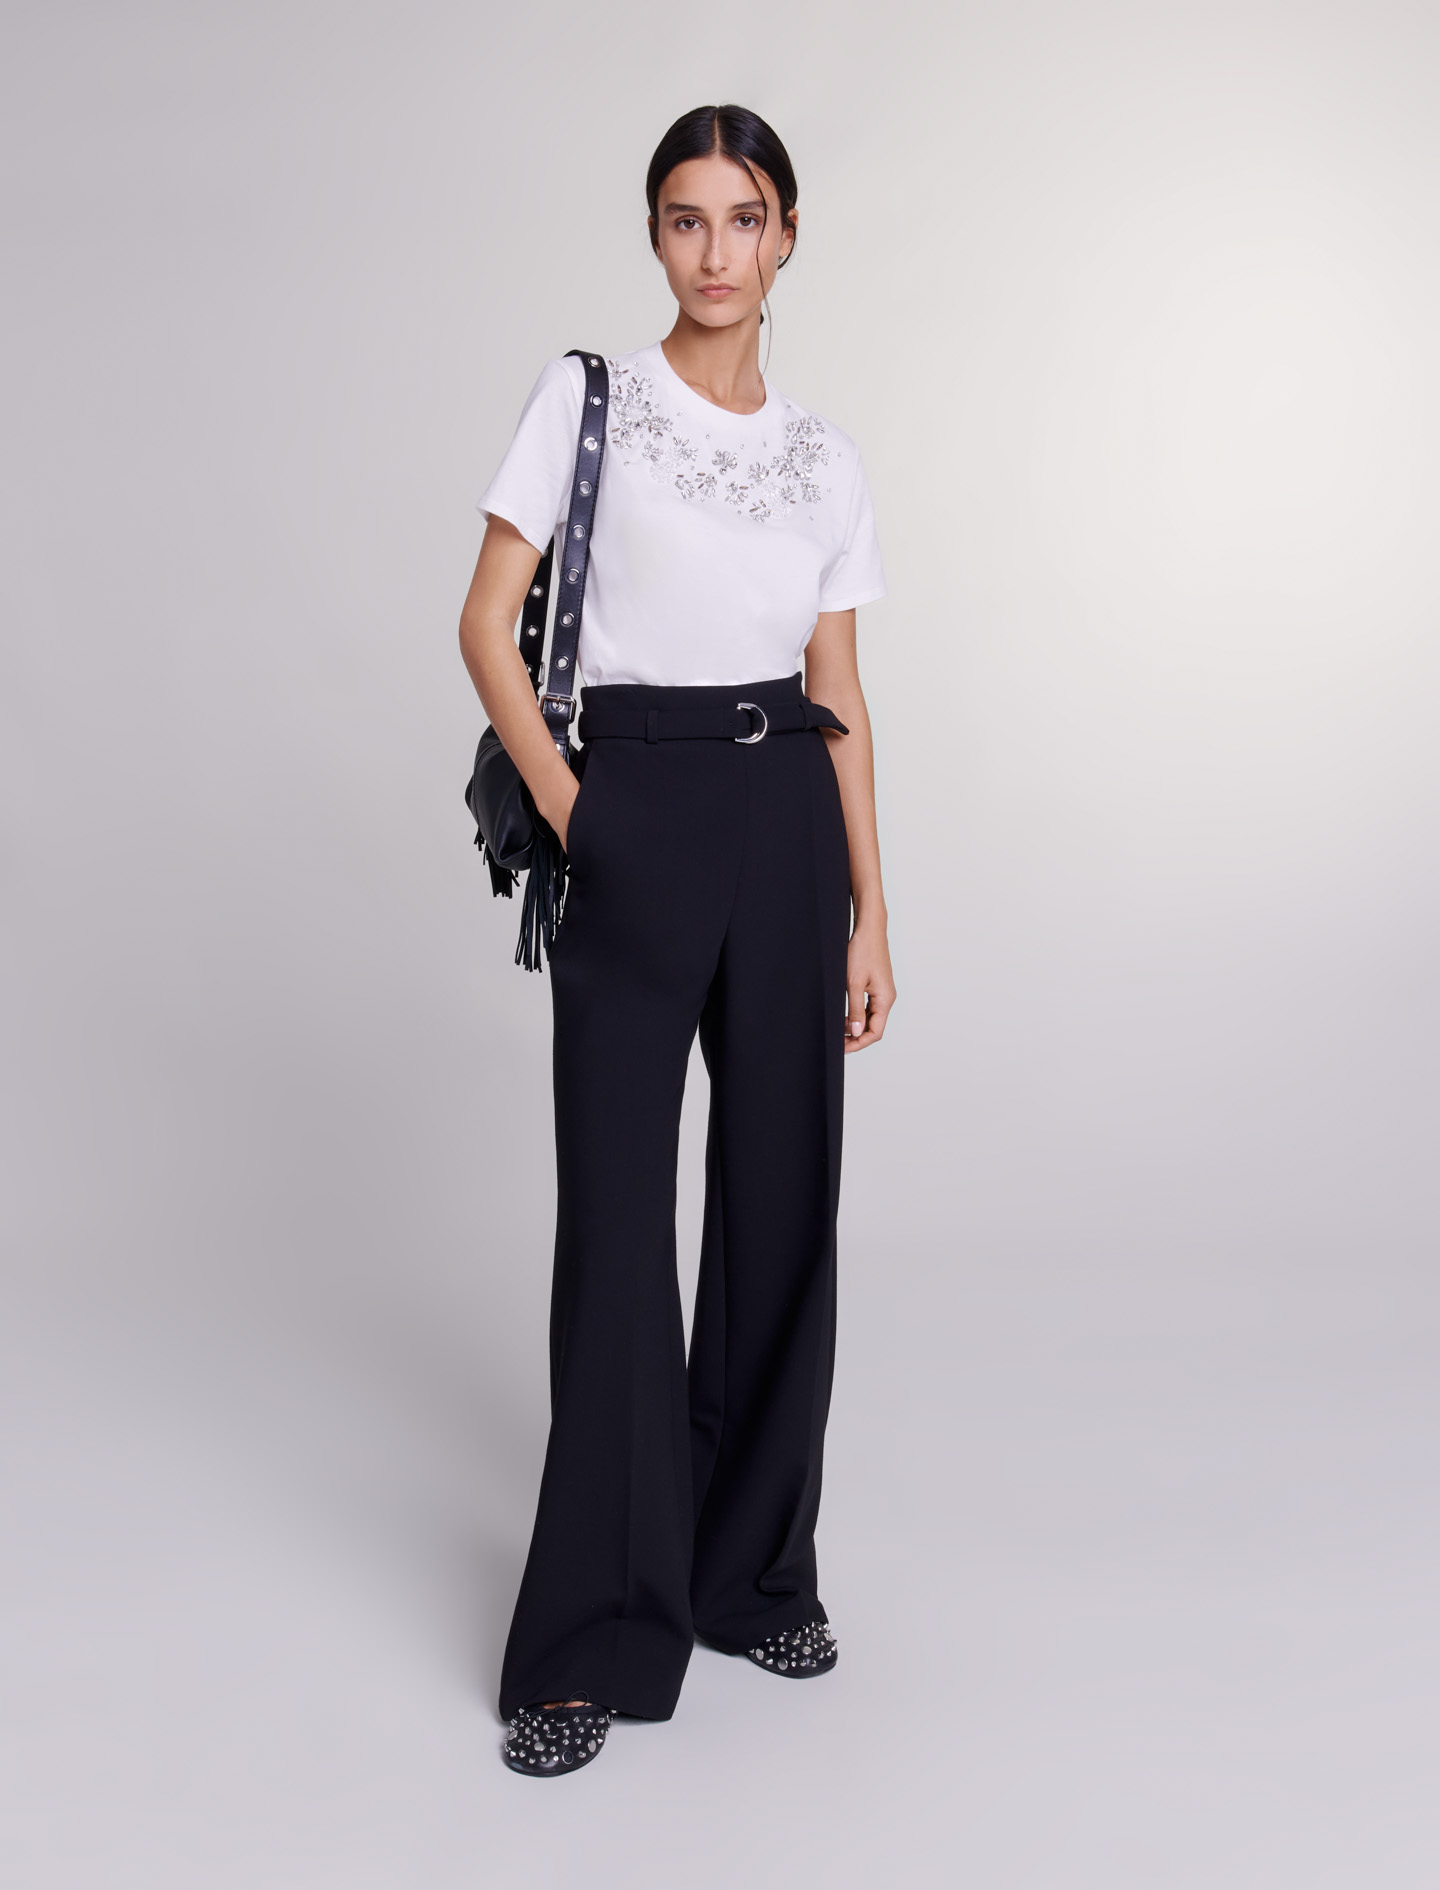 Mixte's polyester, Wide belted trousers for Spring/Summer, size Mixte-Pants & Jeans-US XL / FR 41, in color Black / Black